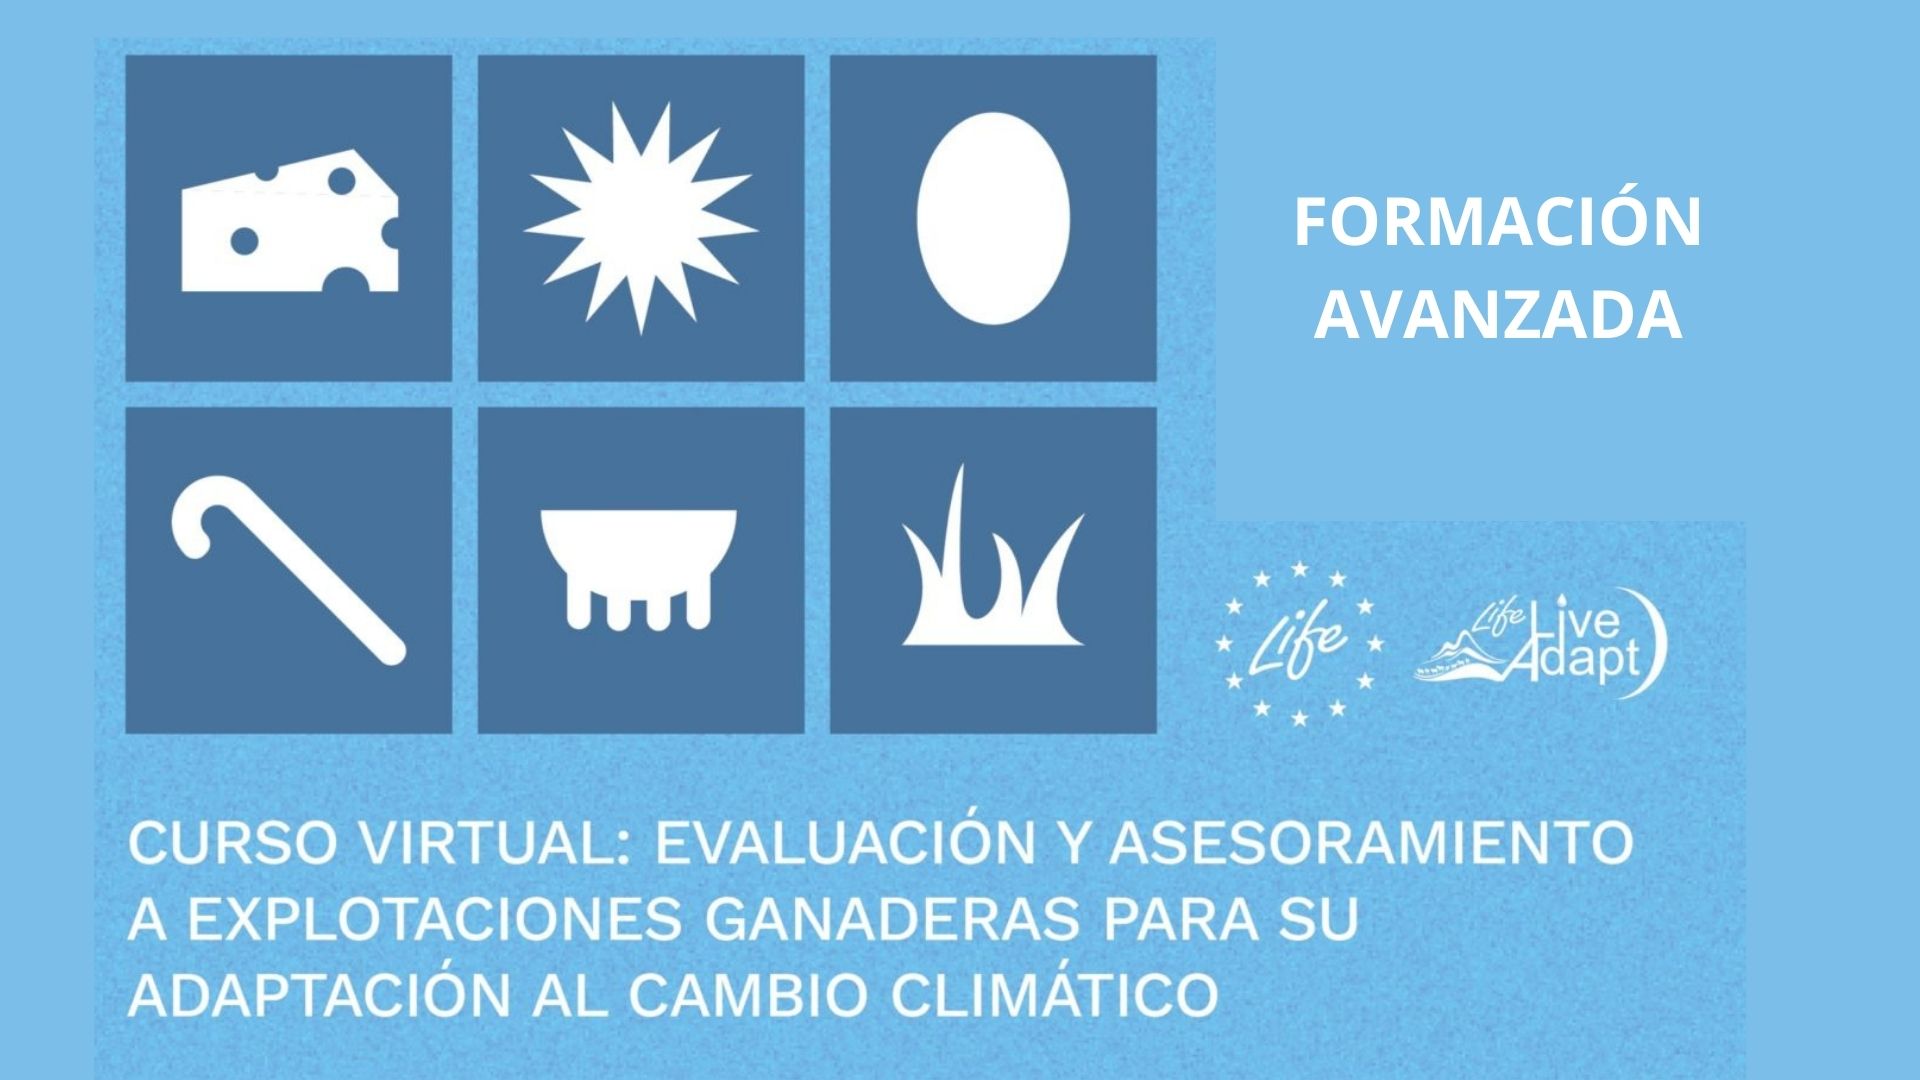 LiveAdapt Course 4 starts: Assessing and advising livestock farms on how to adapt to climate change